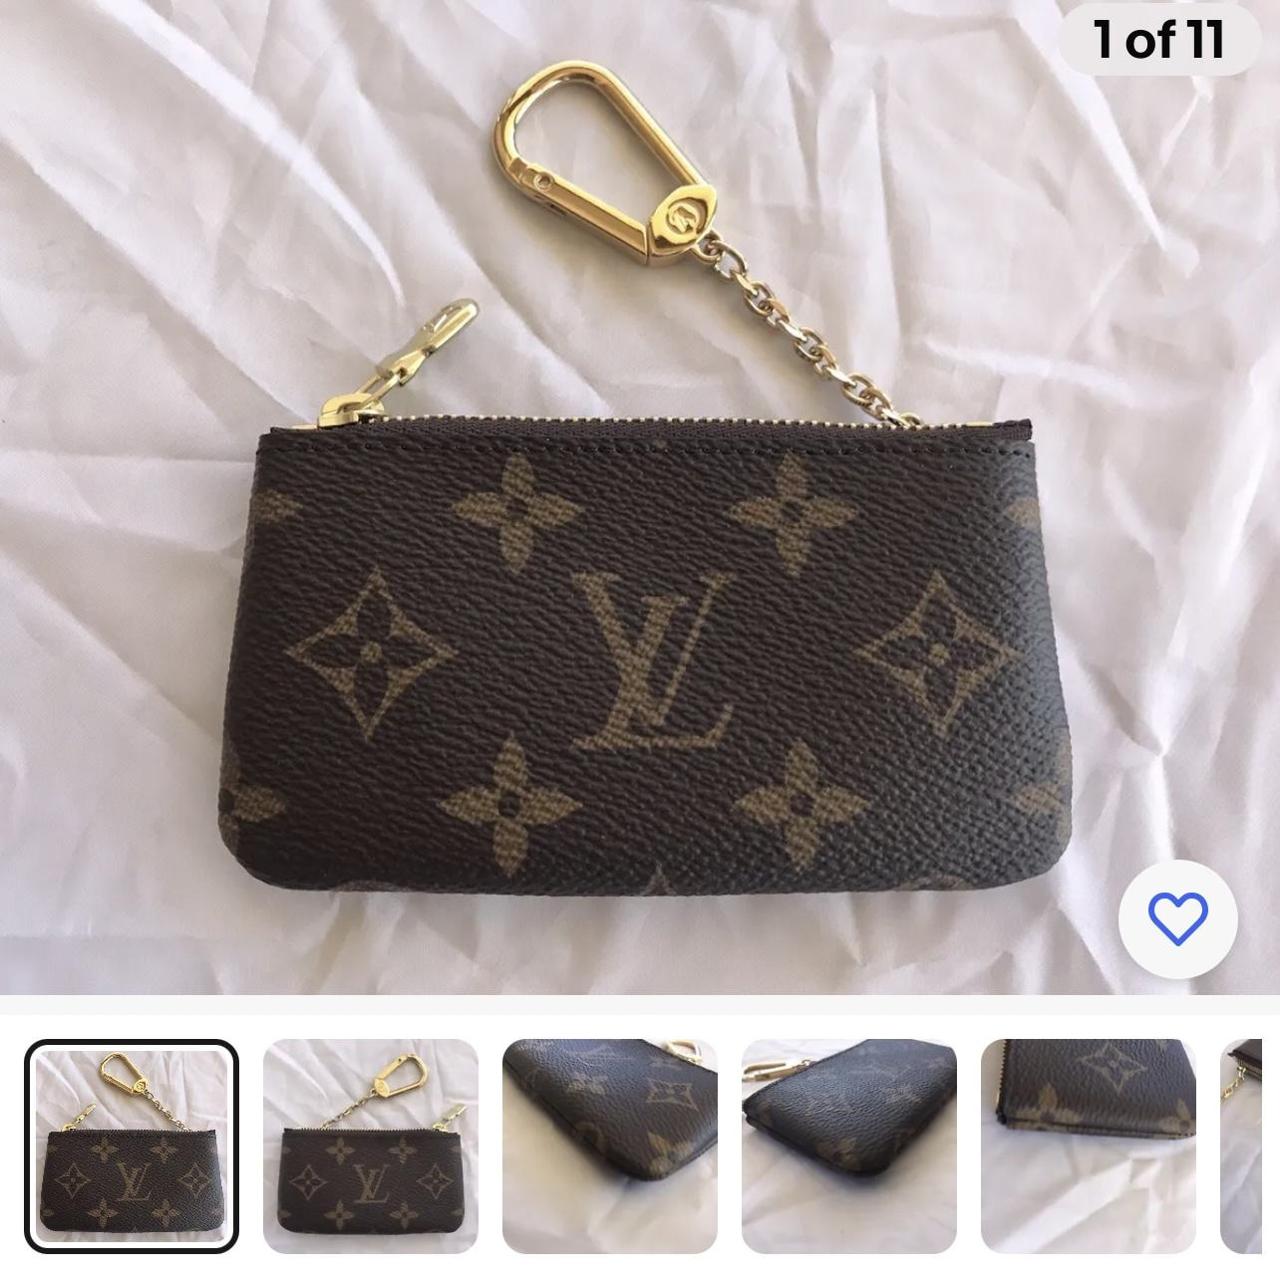 Used Louis Vuitton key pouch